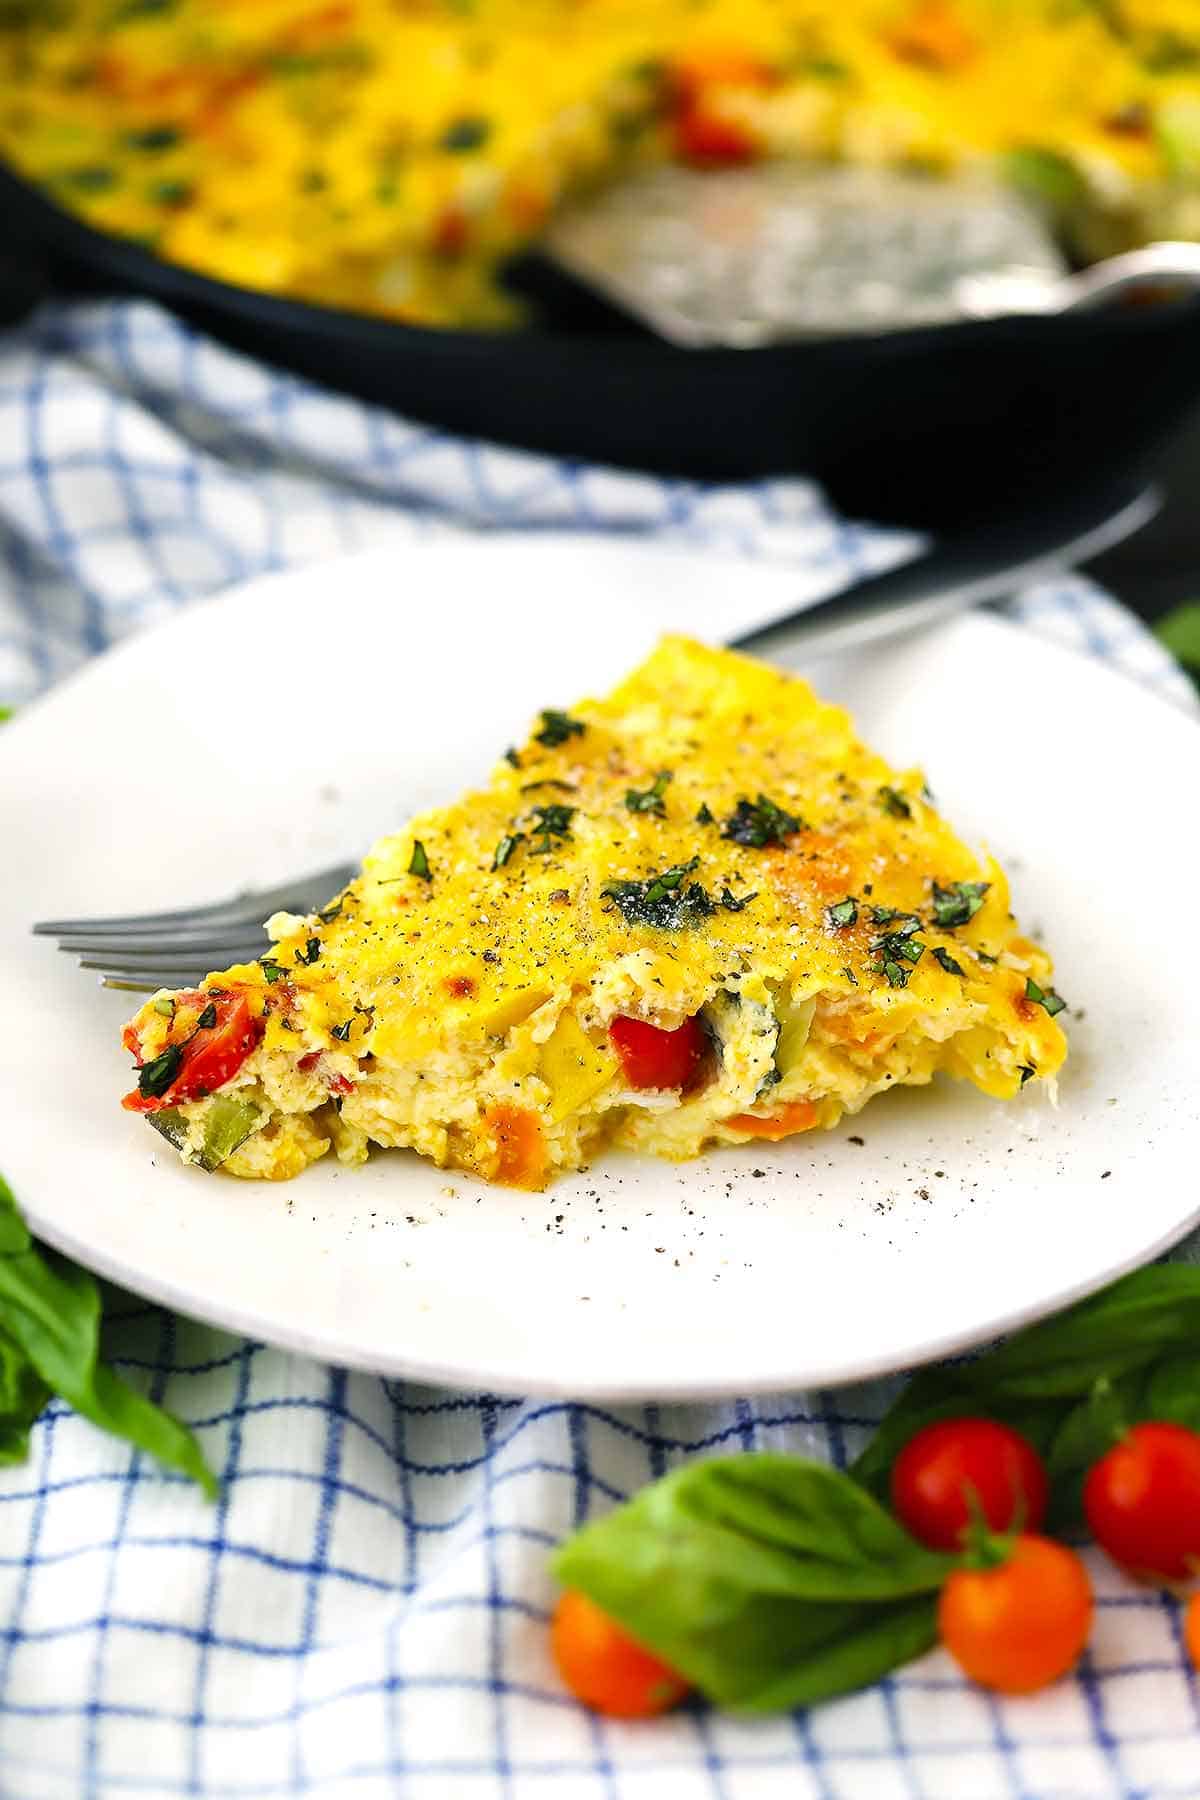 A slice of a frittata on a white plate with a fork.